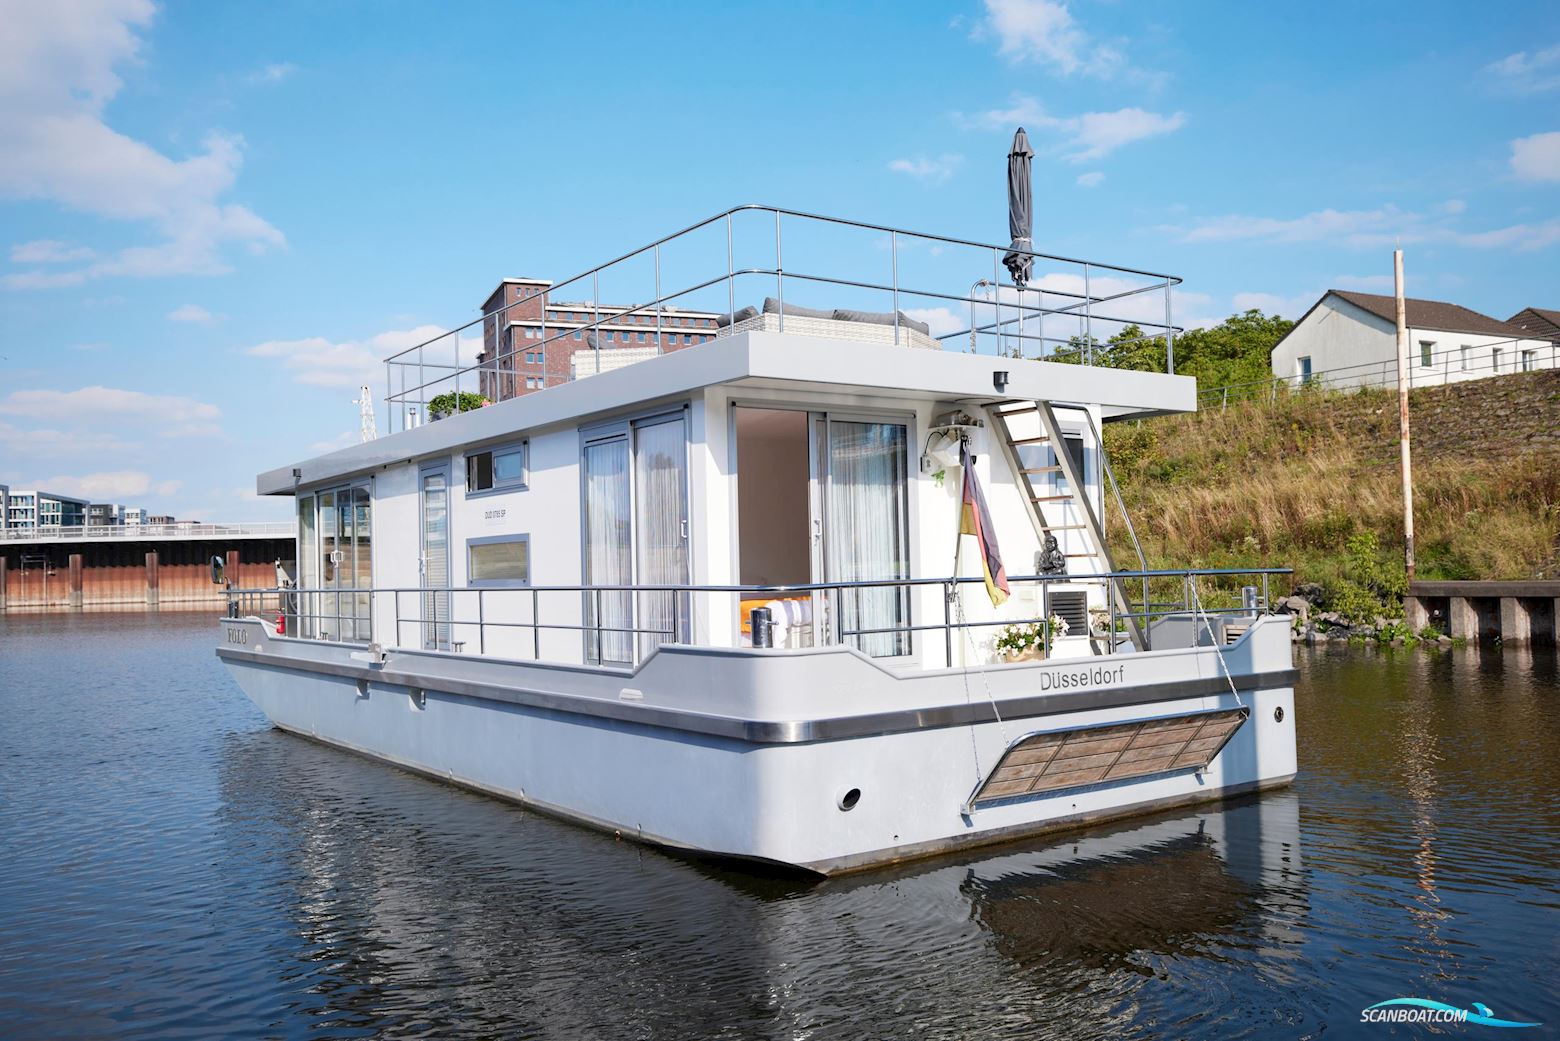 Houseboat Motor Cruiser Home Traveller Xxl 1500 Live a board / River boat 2017, with John Deere engine, Germany